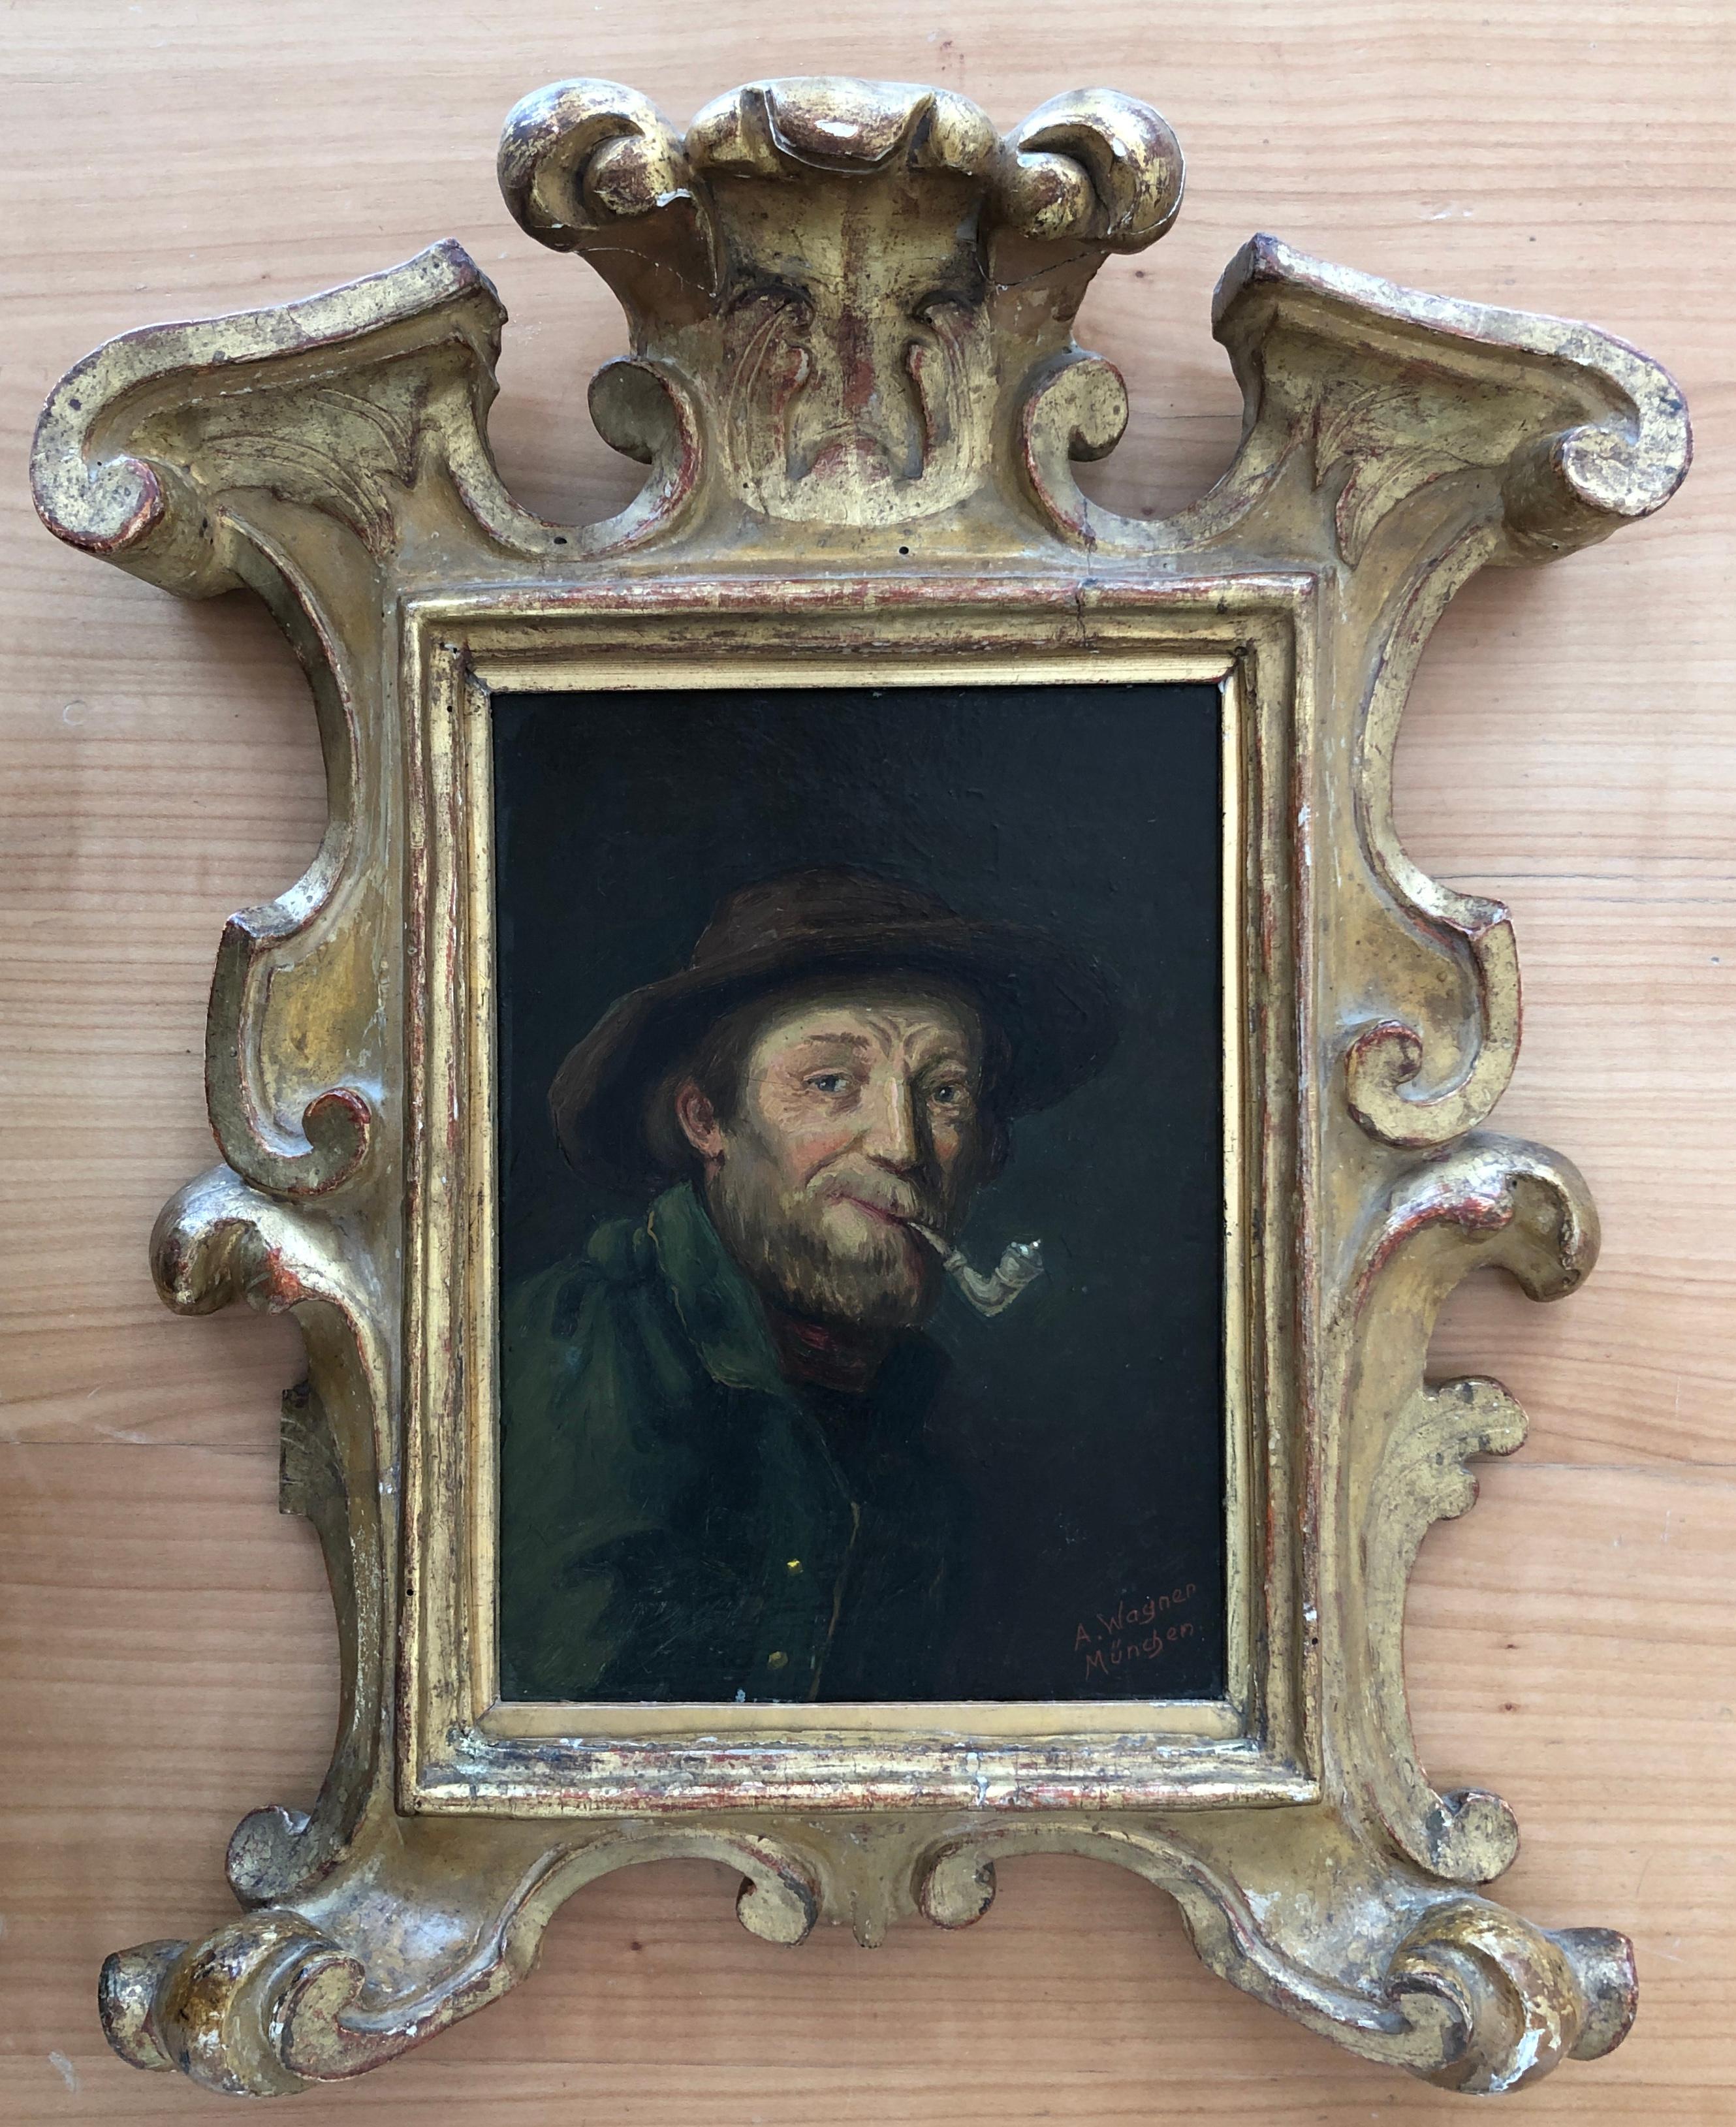 Bearded man with pipe and hat - Painting by A. Wagner